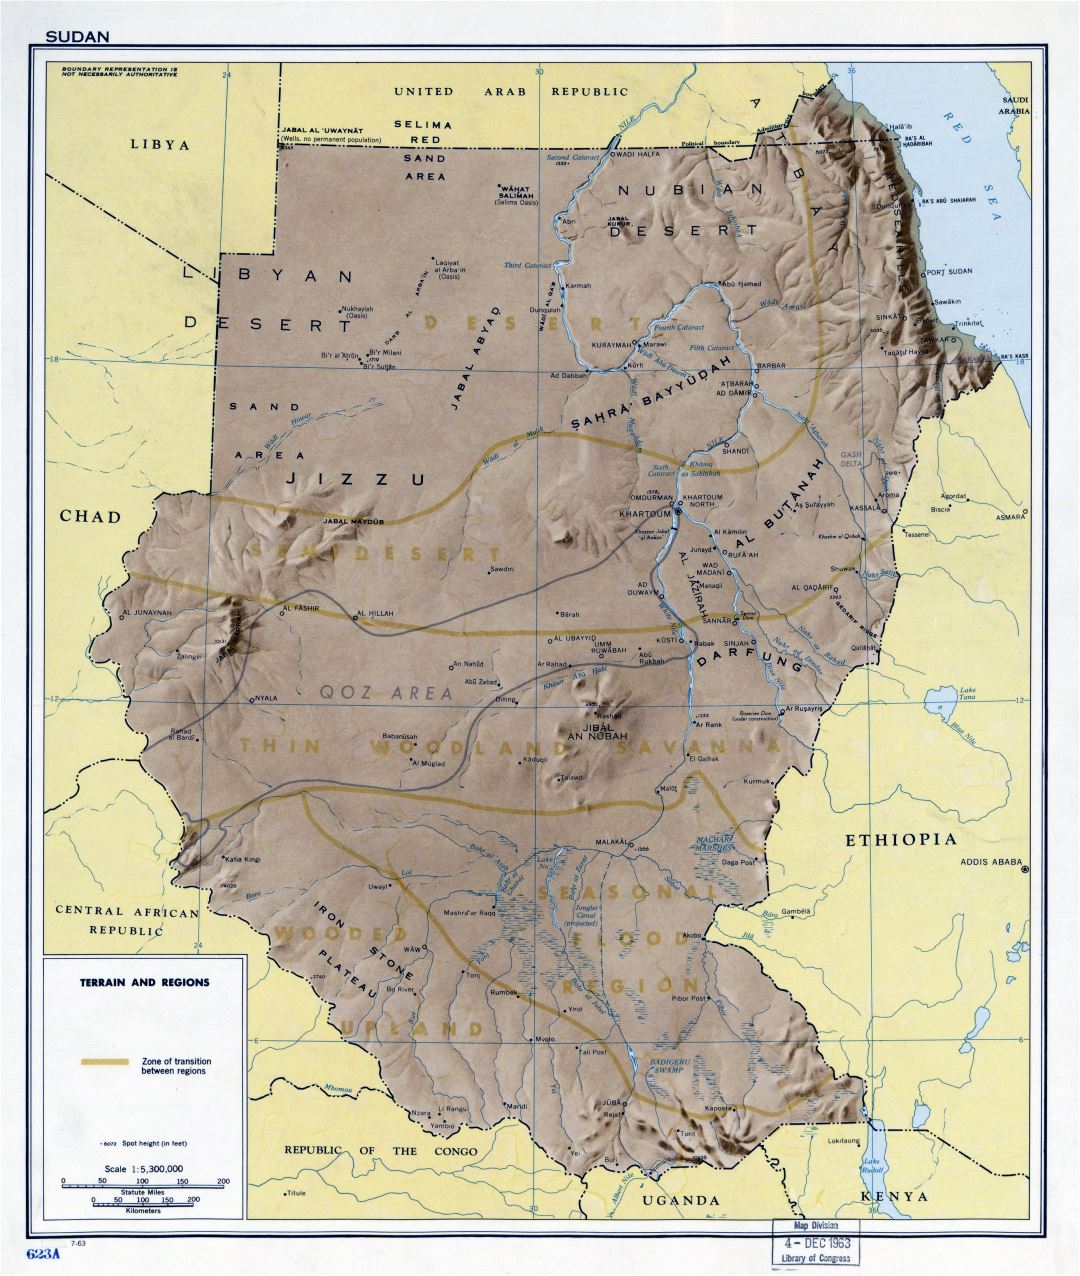 Large detailed terrain and regions map of Sudan - 1963